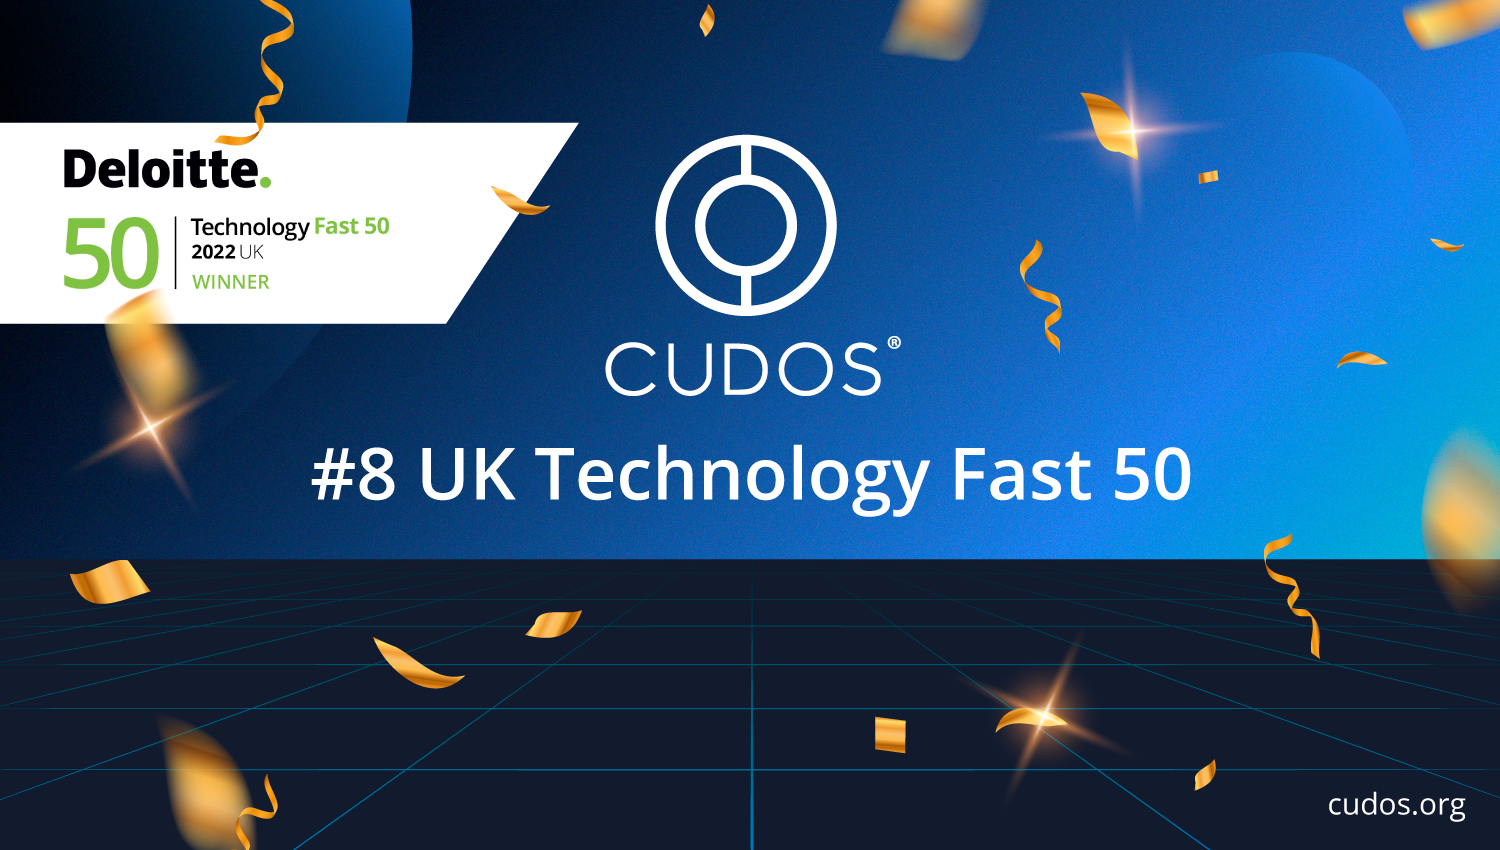 Cudos ranks eighth in Deloitte’s Technology Fast 50 UK 2022